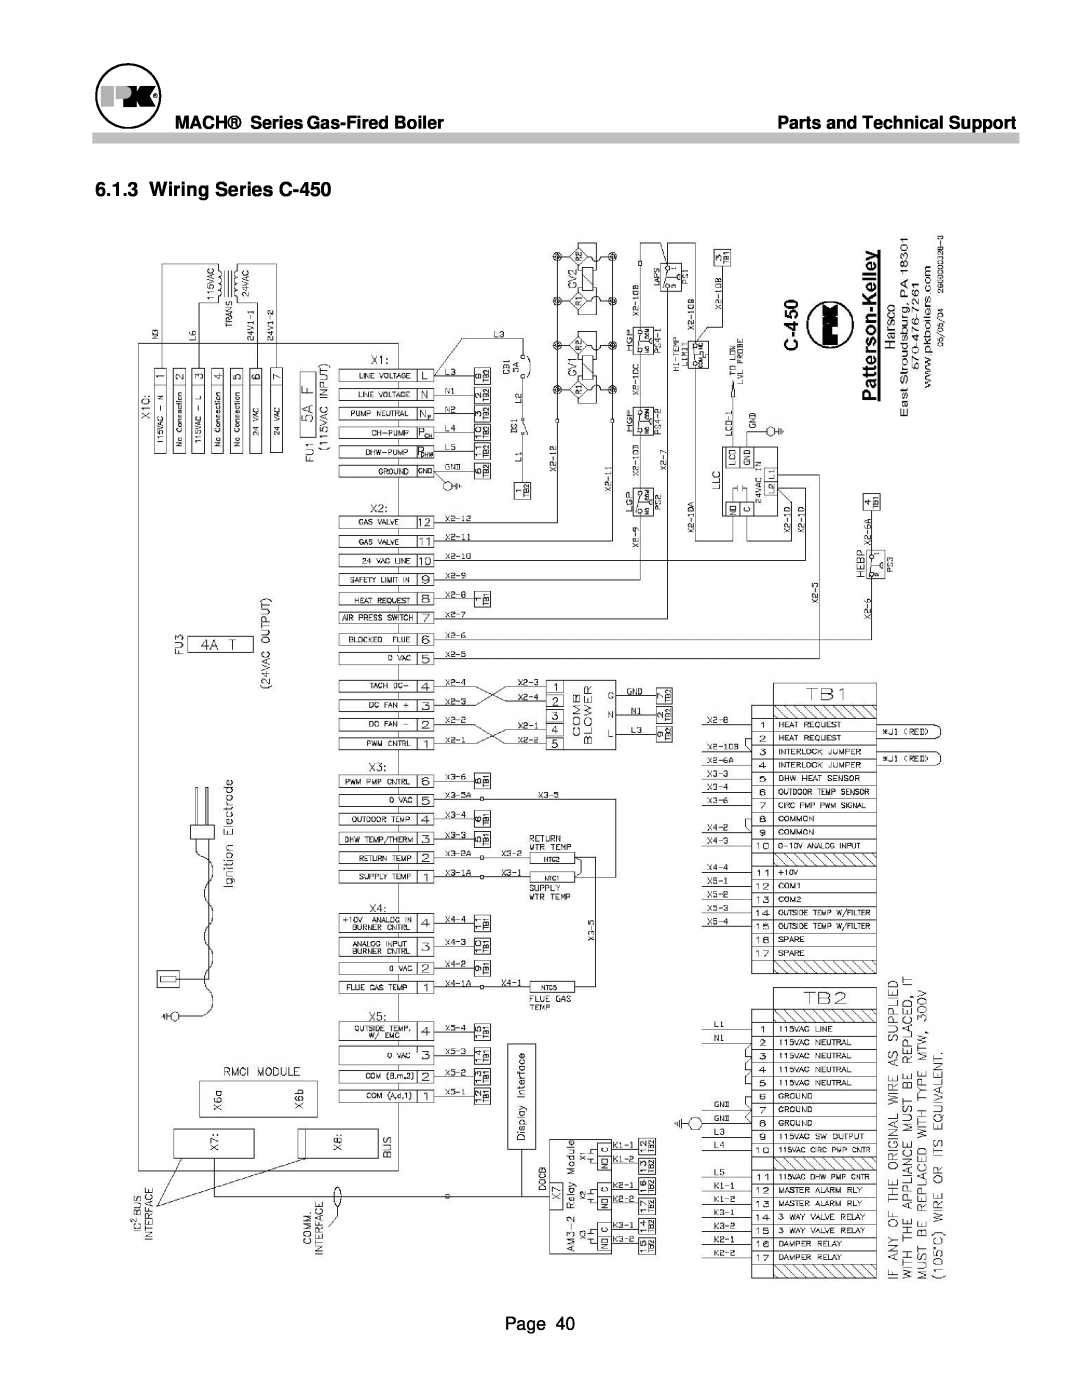 Patterson-Kelley MACH-05 manual Wiring Series C-450, MACH Series Gas-FiredBoiler, Parts and Technical Support 